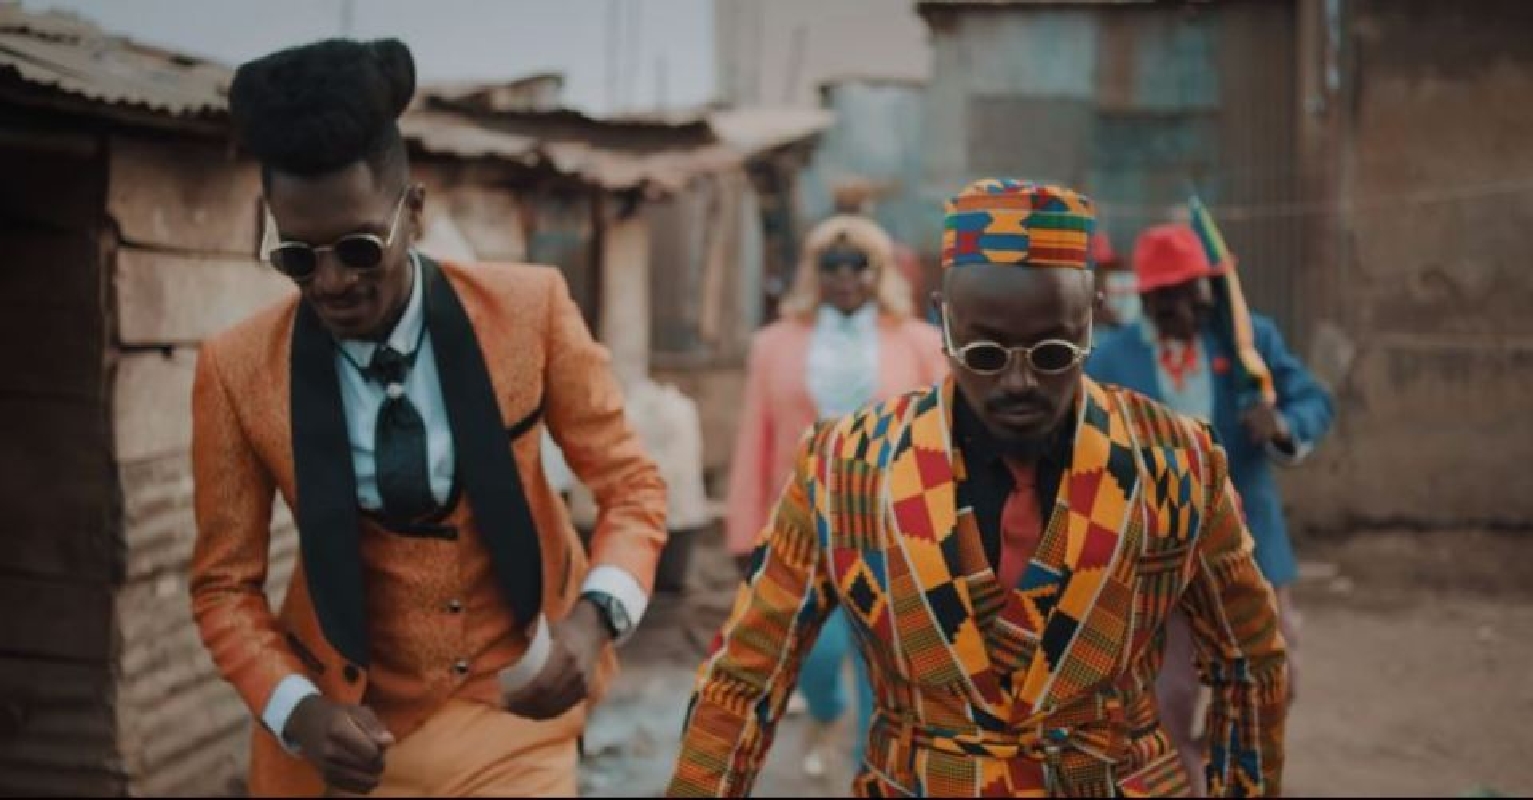 Turn Up The Vibe Video Brings Ykee Benda and A Pass Together | Spurzine